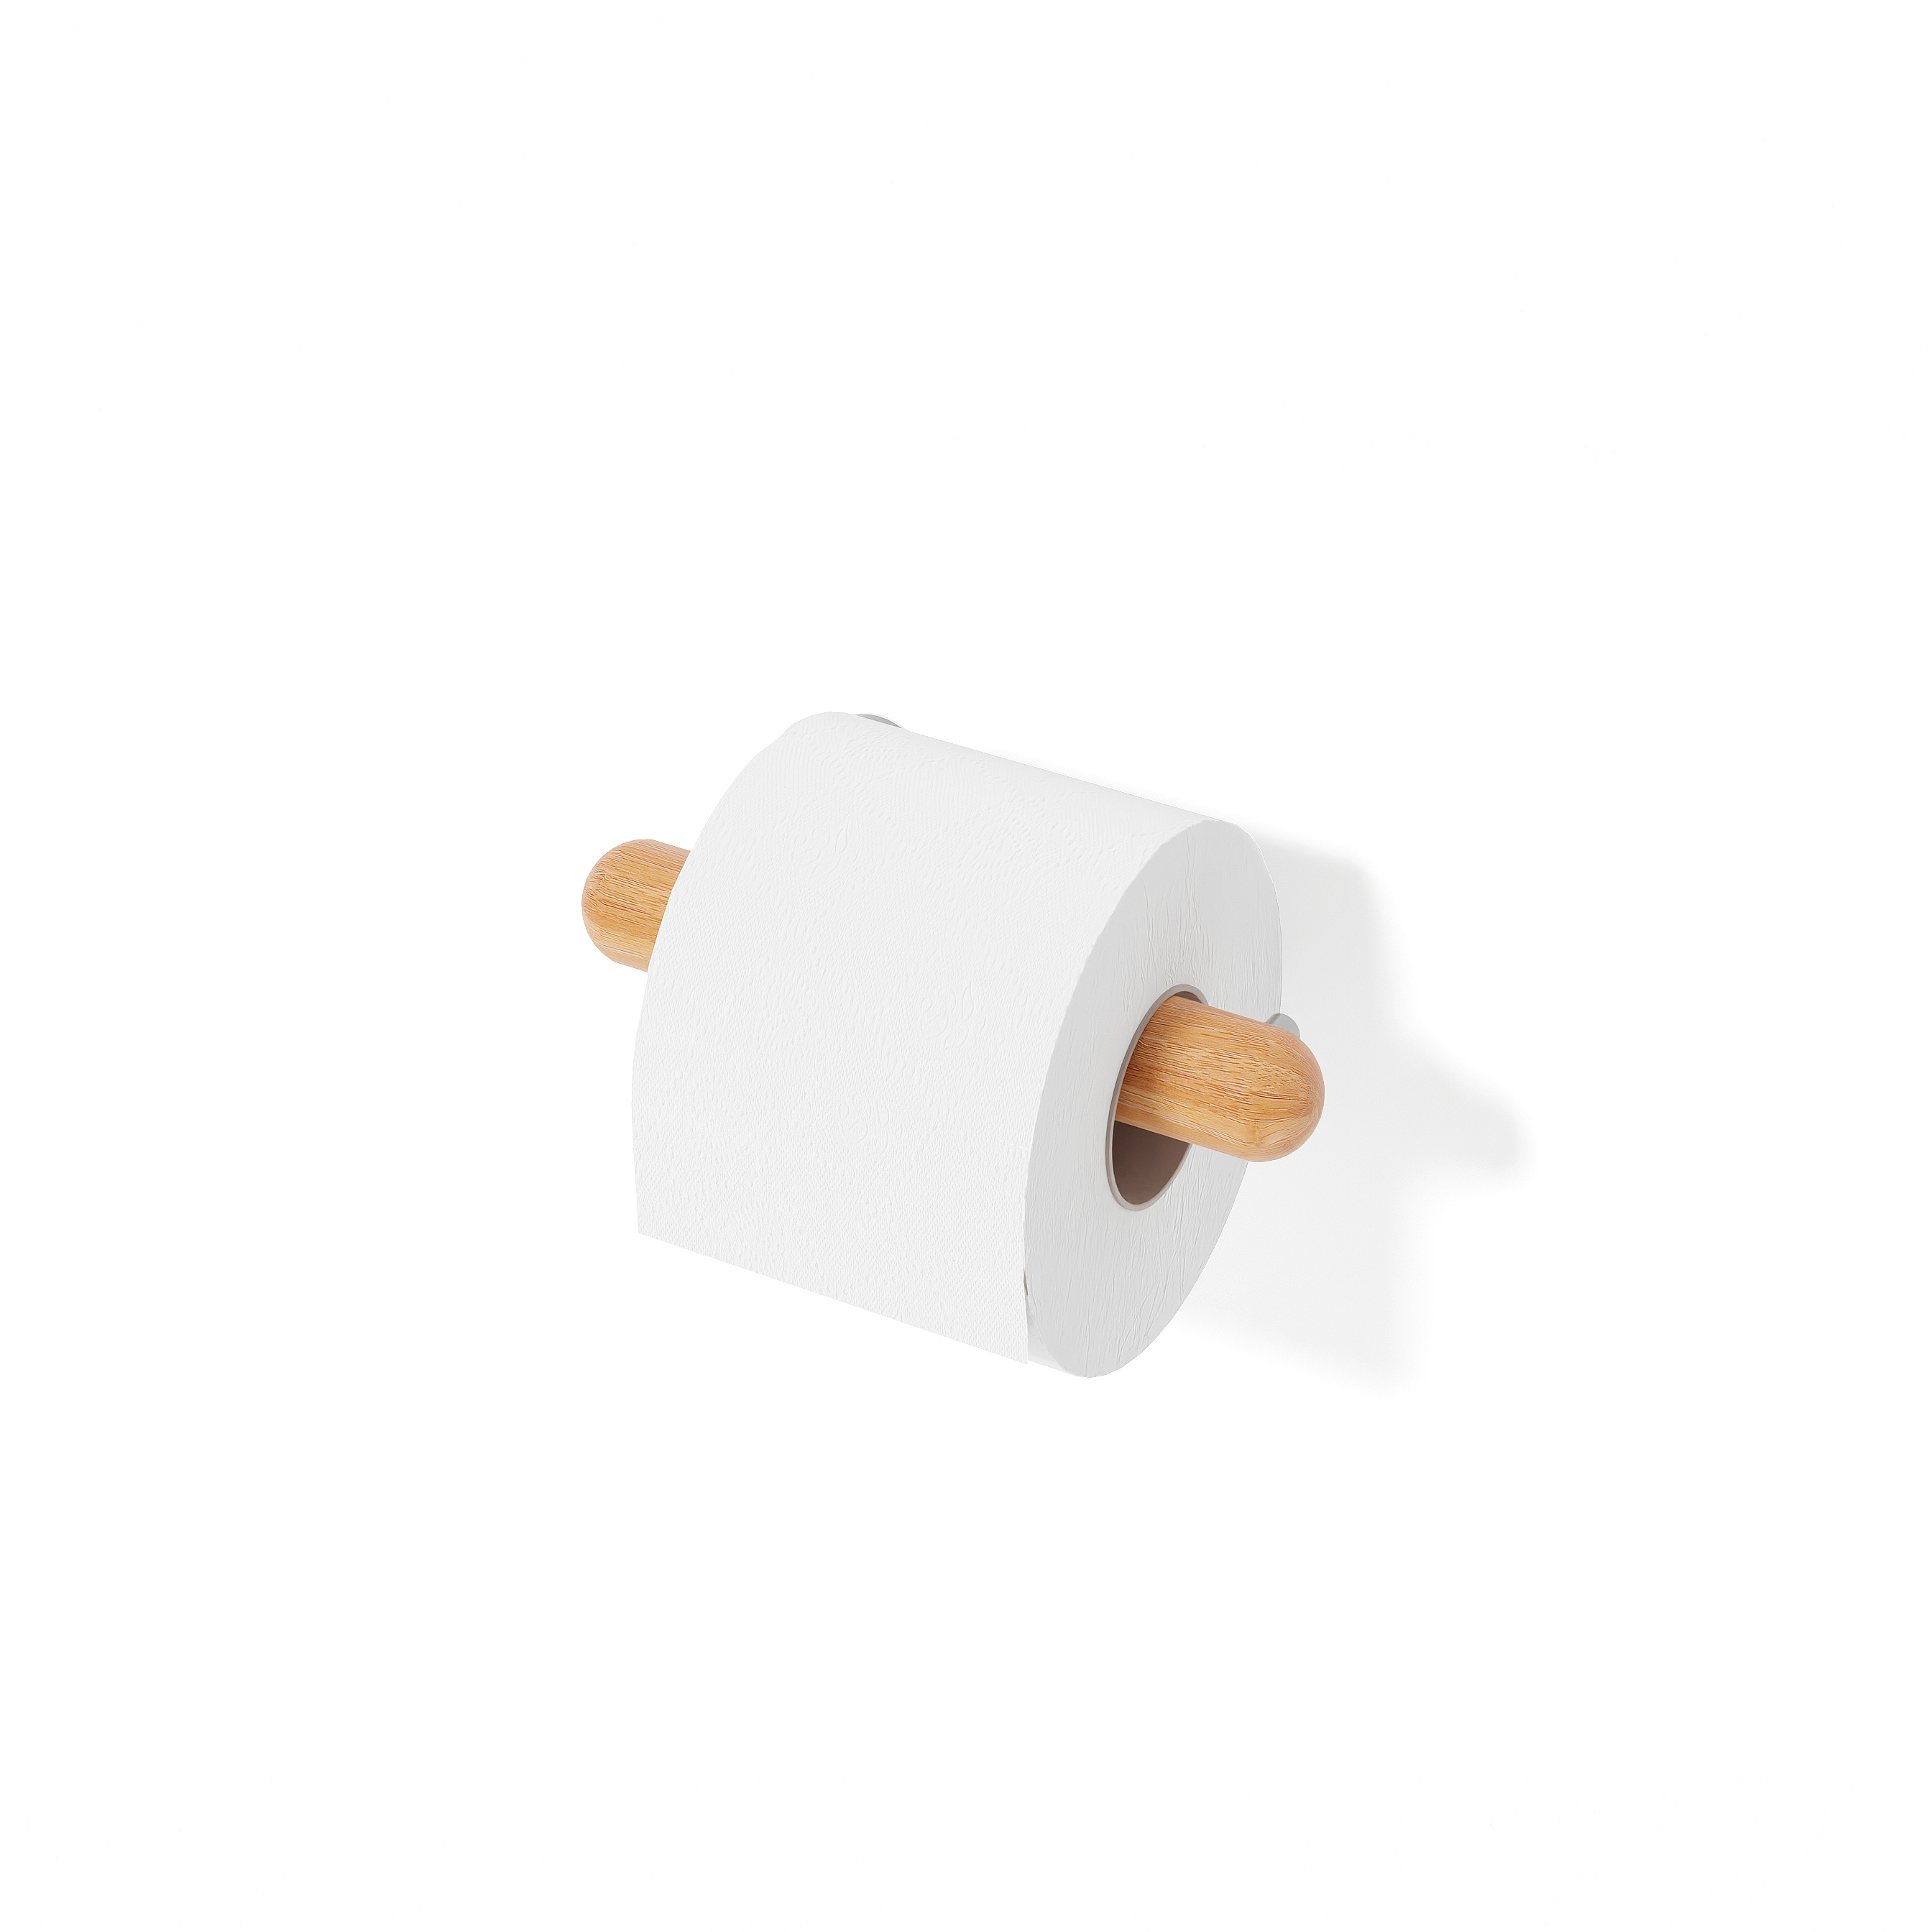 Wireworks Bamboo Yoku Toilet Roll Holder